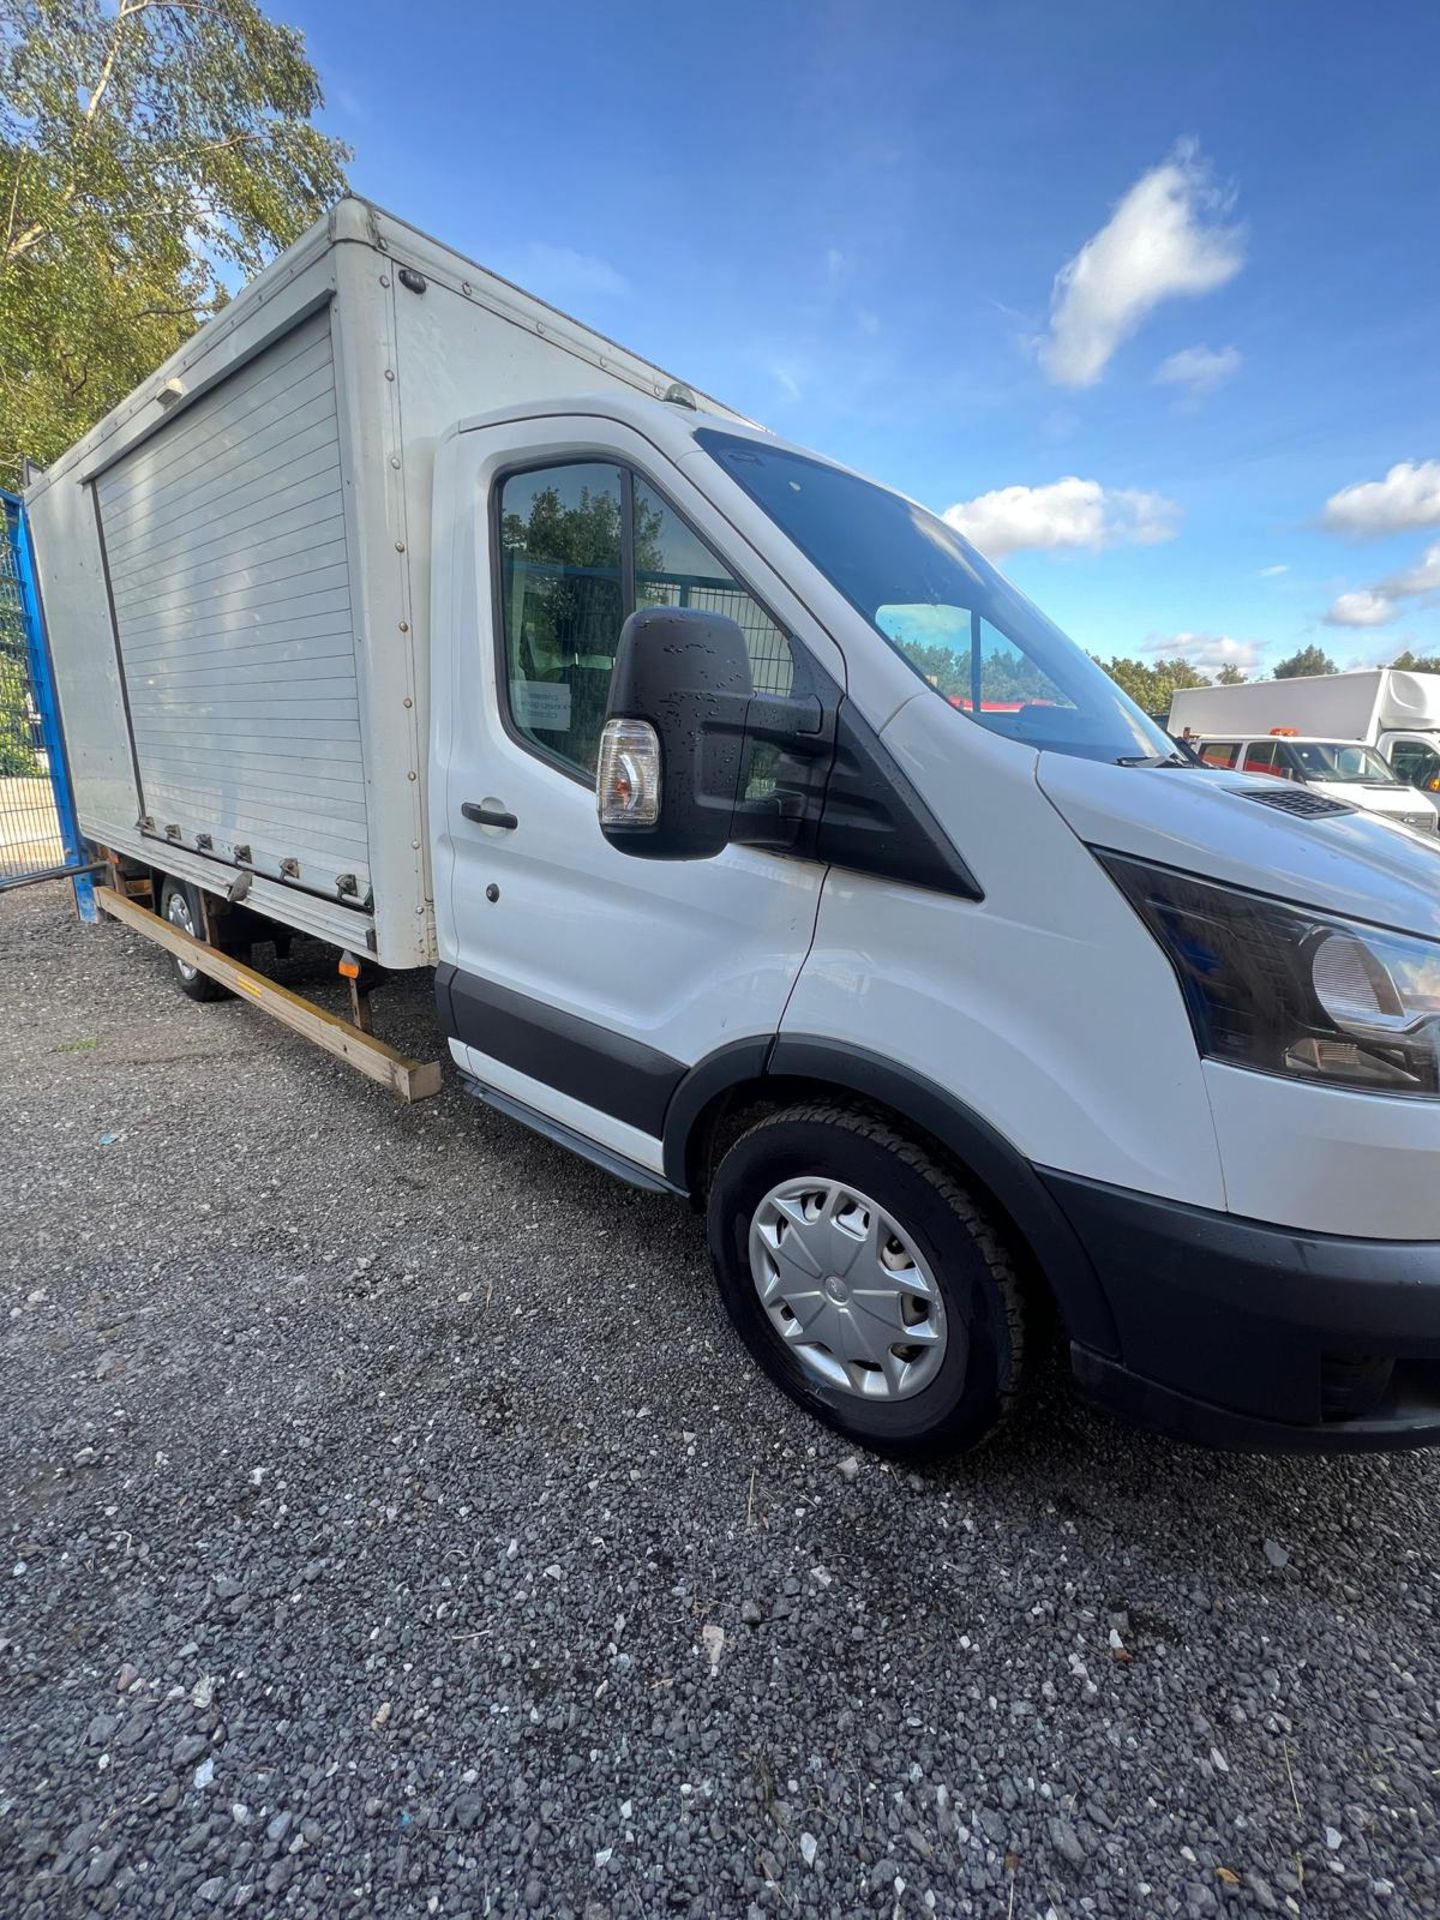 FORD TRANSIT BOX VAN 2017 LUTON EURO6 LWB 6 SPEED MANUAL 1COMPANY OWNER FROM NEW - Image 2 of 14